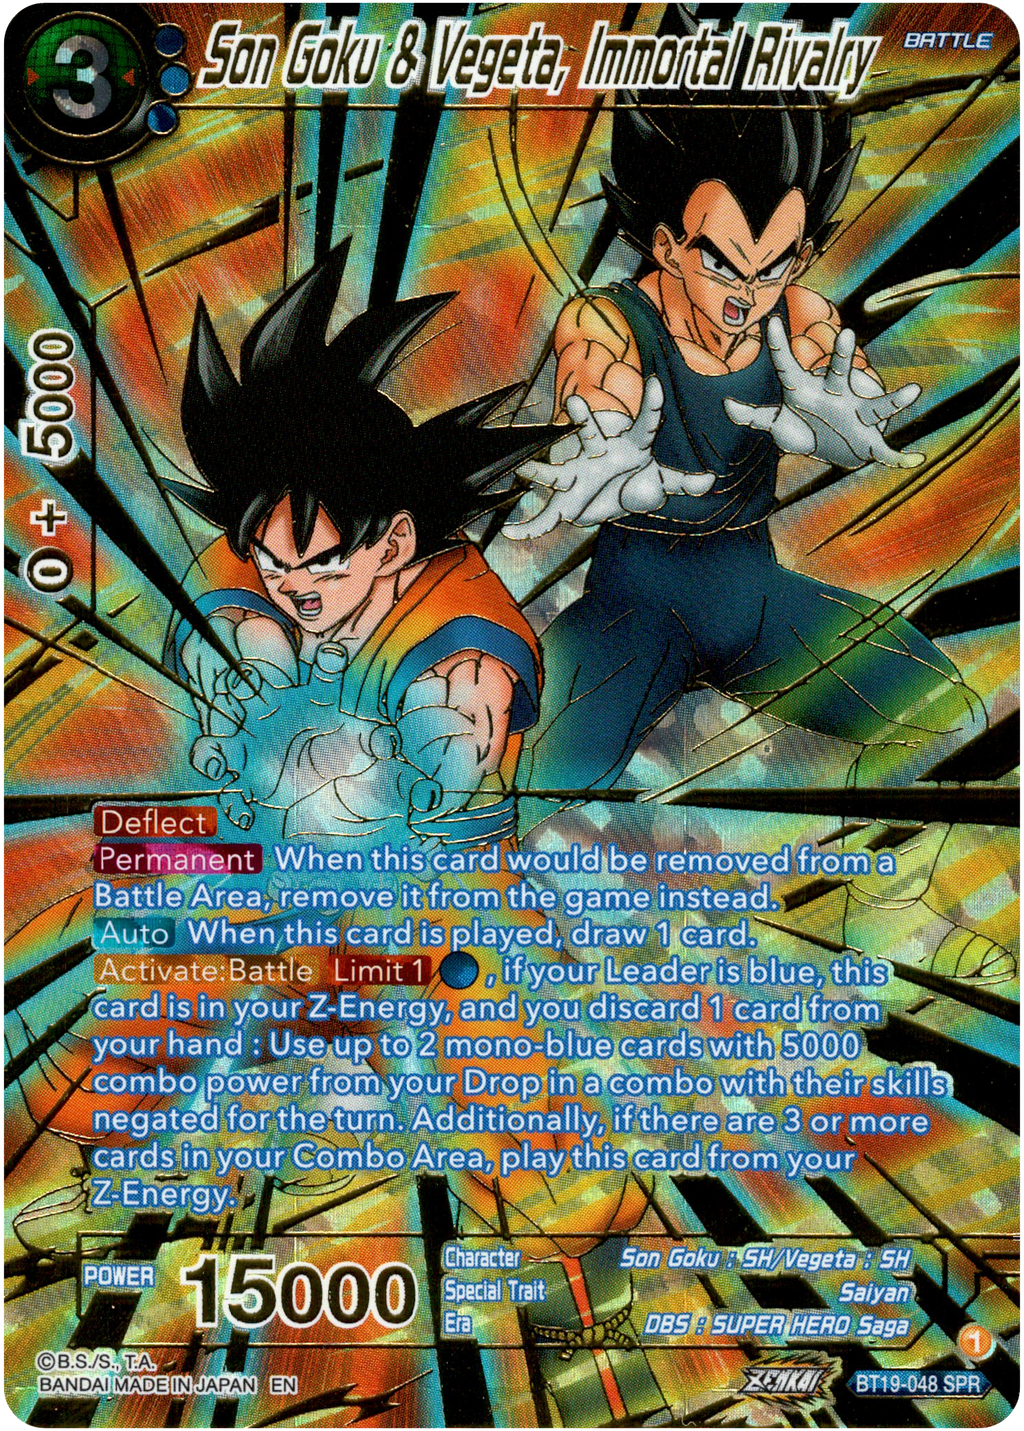 IS IT JUST A RIVALRY OR ARE GOKU AND VEGETA FRIENDS? 